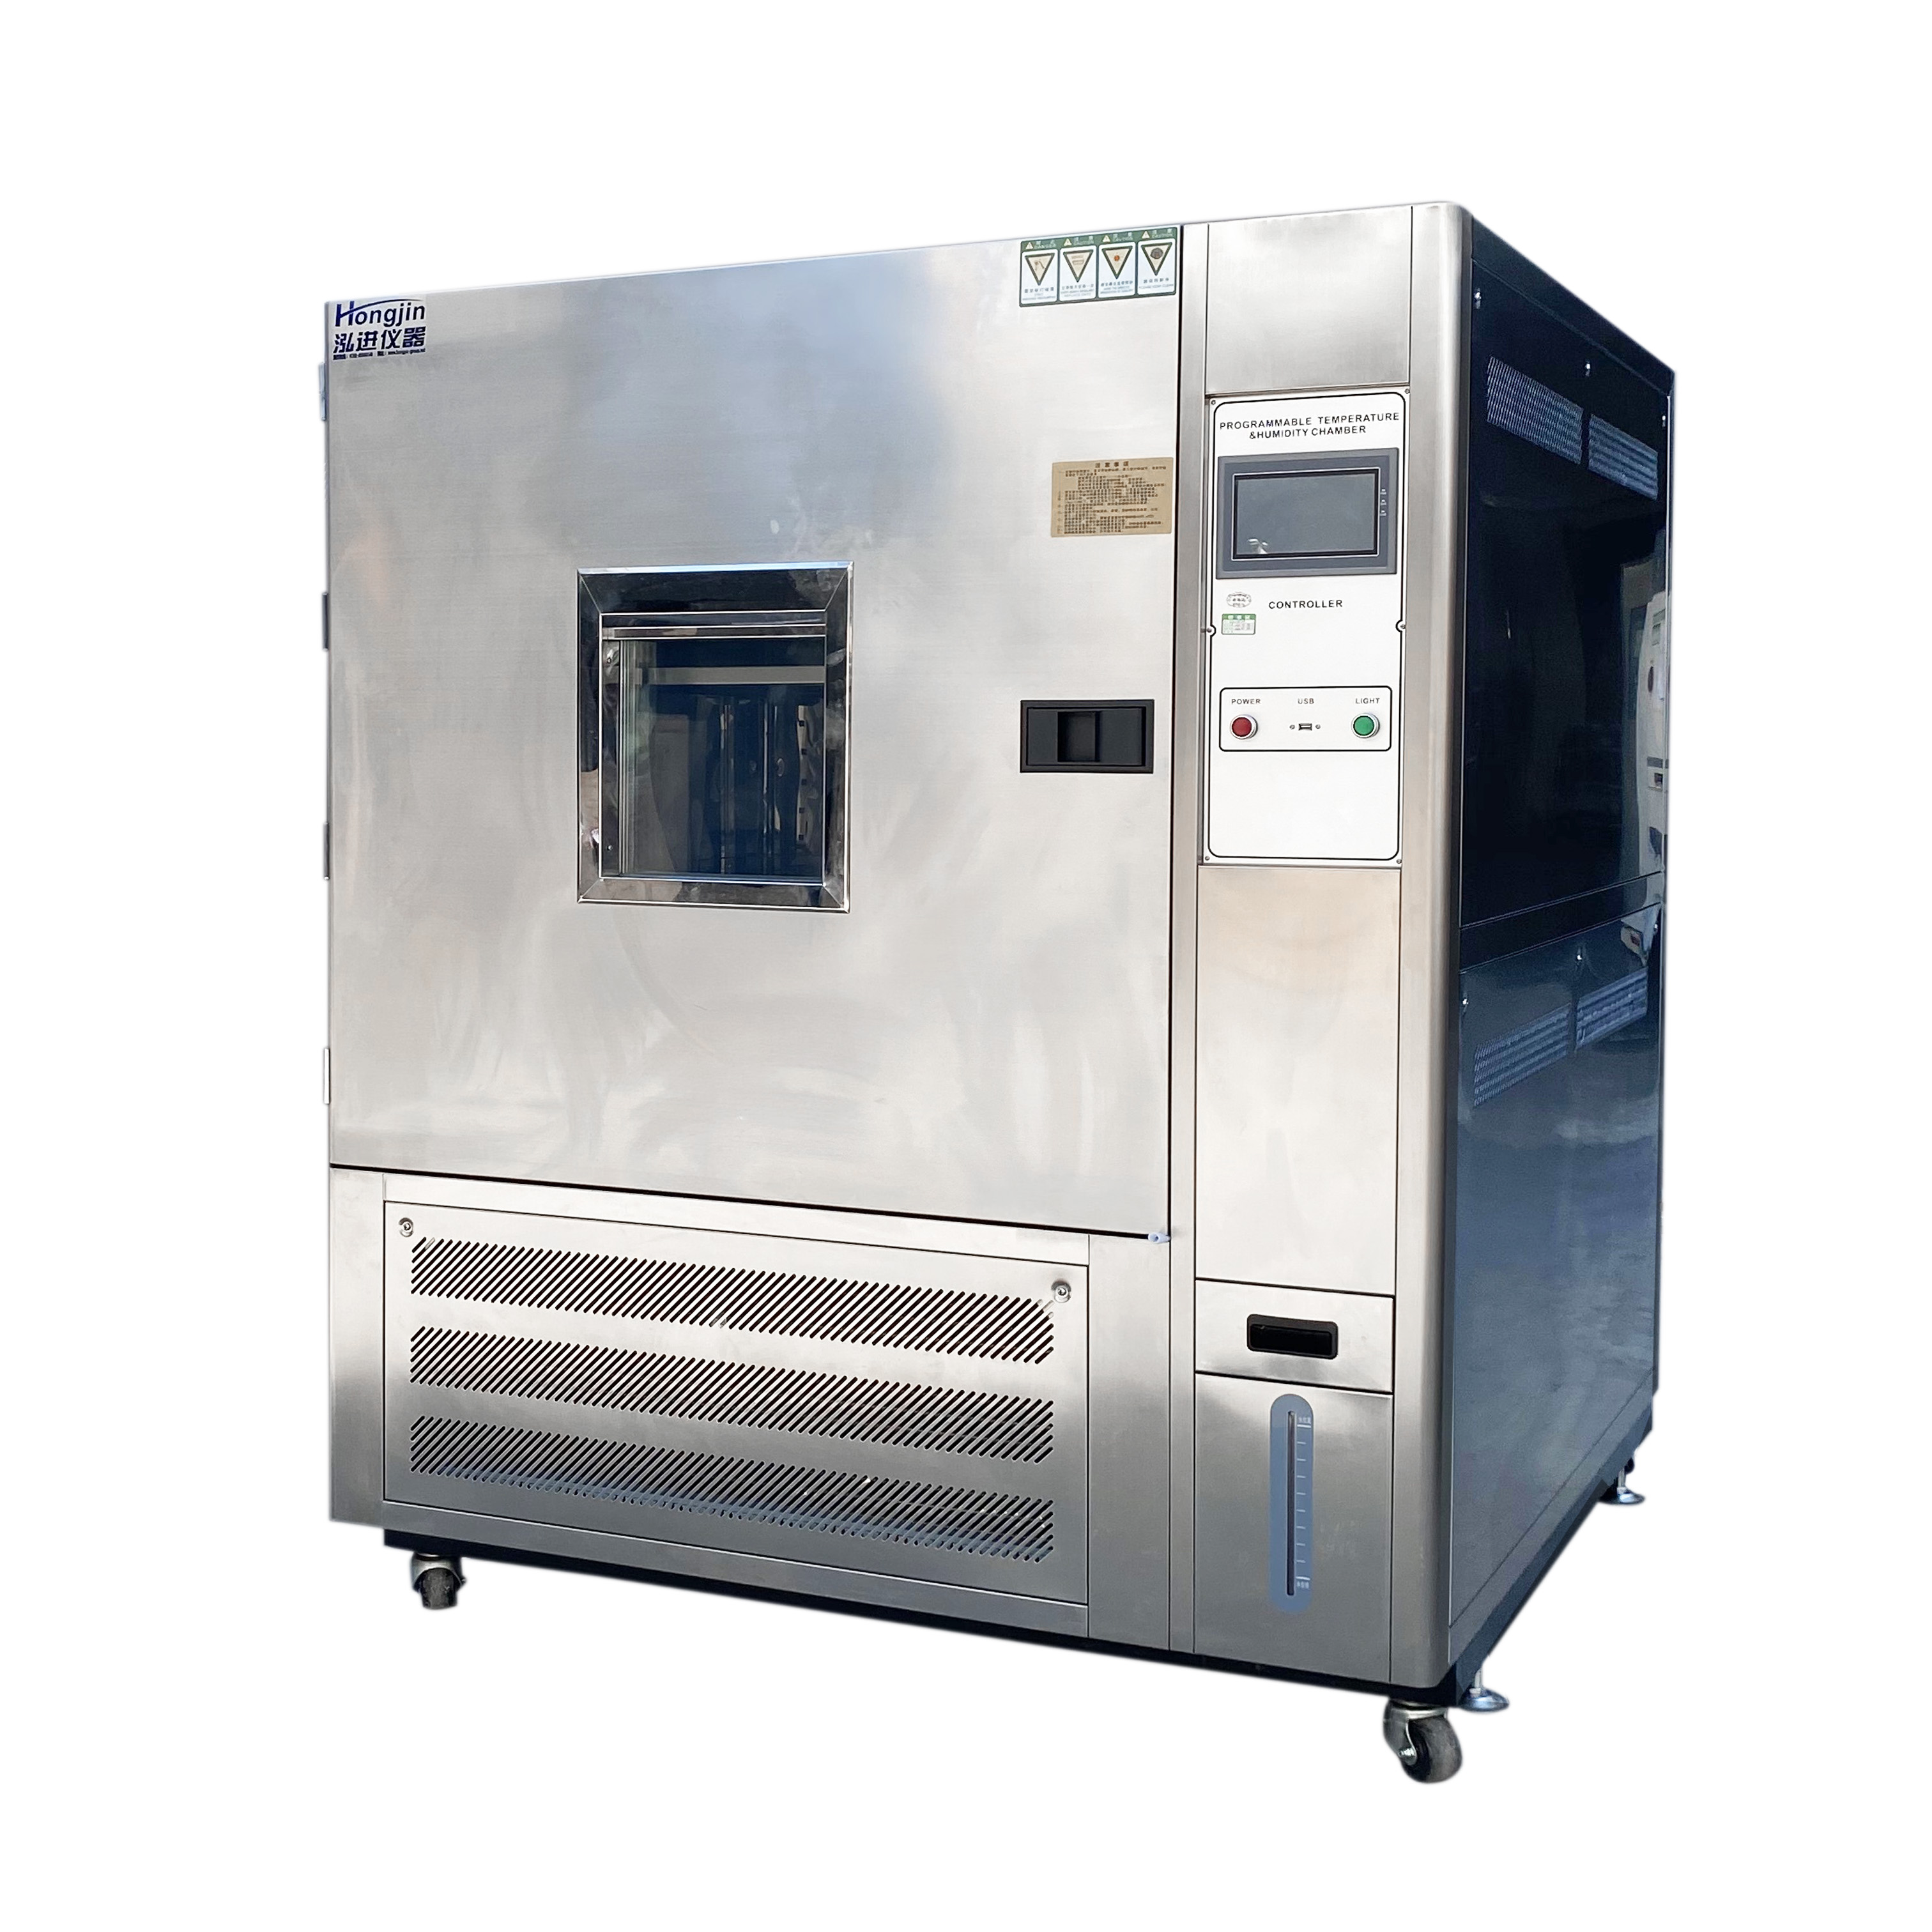 Hot sale Wire Tensile Testing Machine - Sus 304 Stainless Steel Surface Stability Environmental Test Chamber for Humidity And Temperature Controller – Hongjin